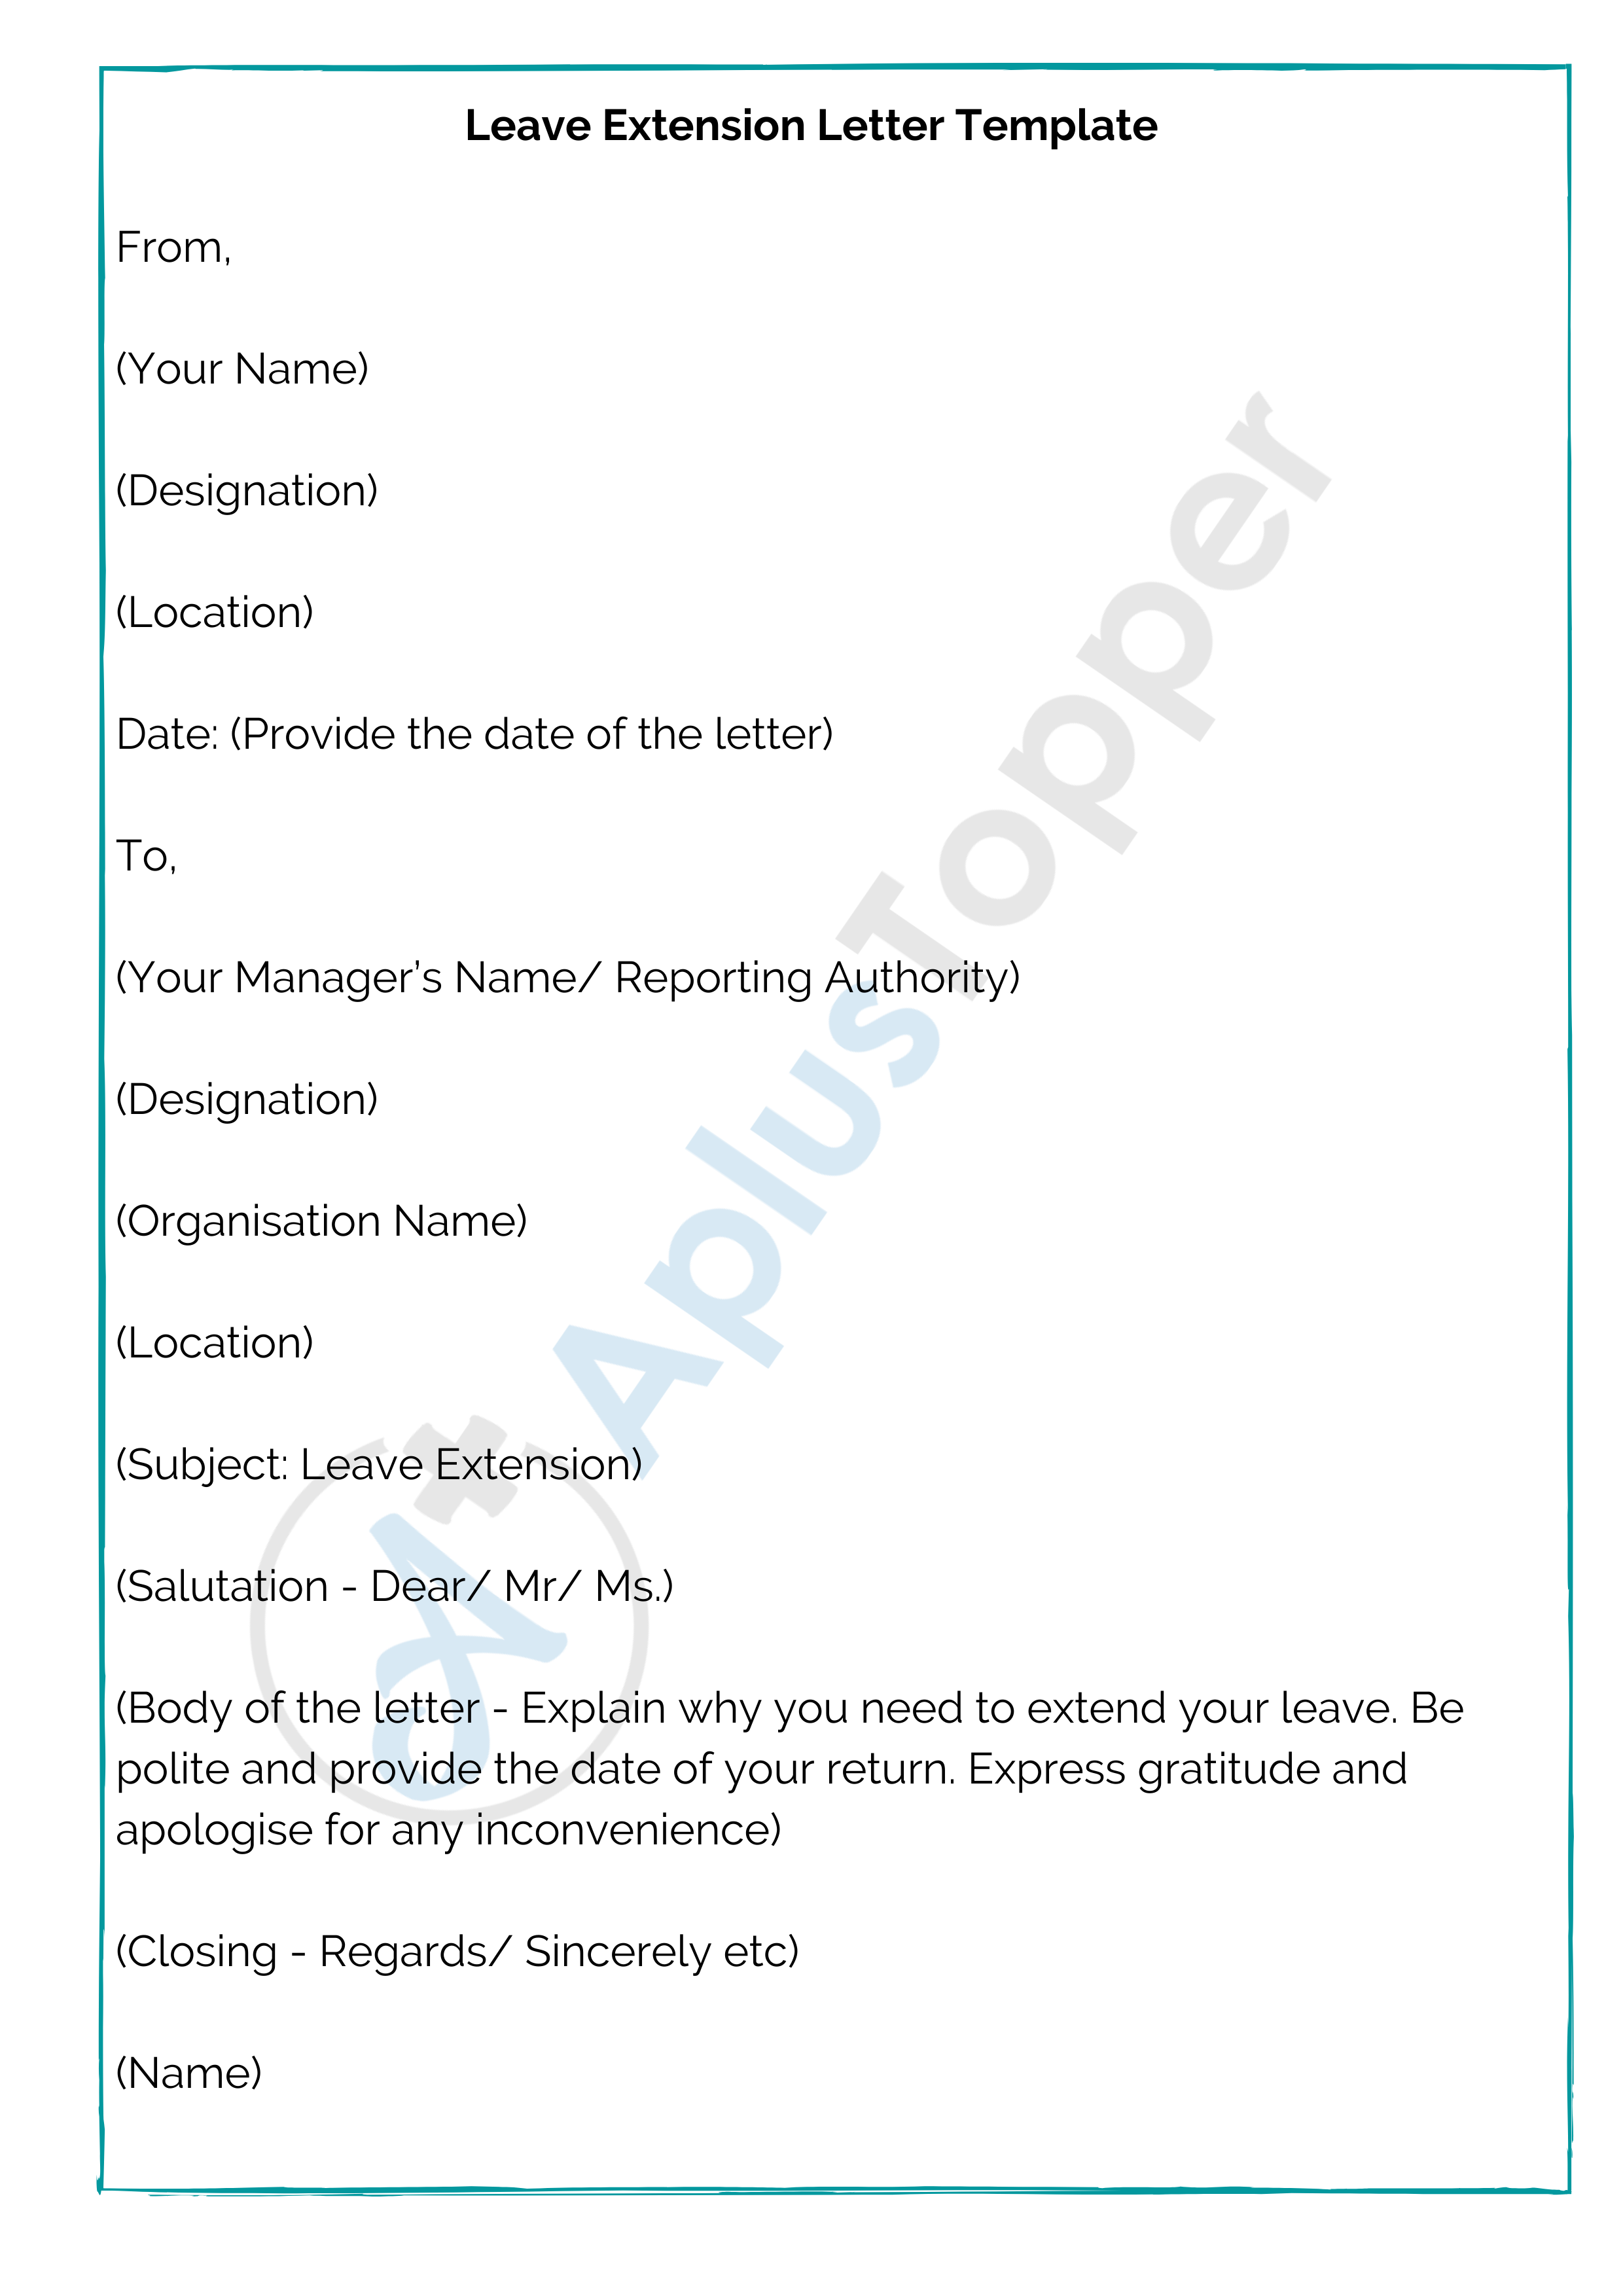 Leave Extension Letter Template